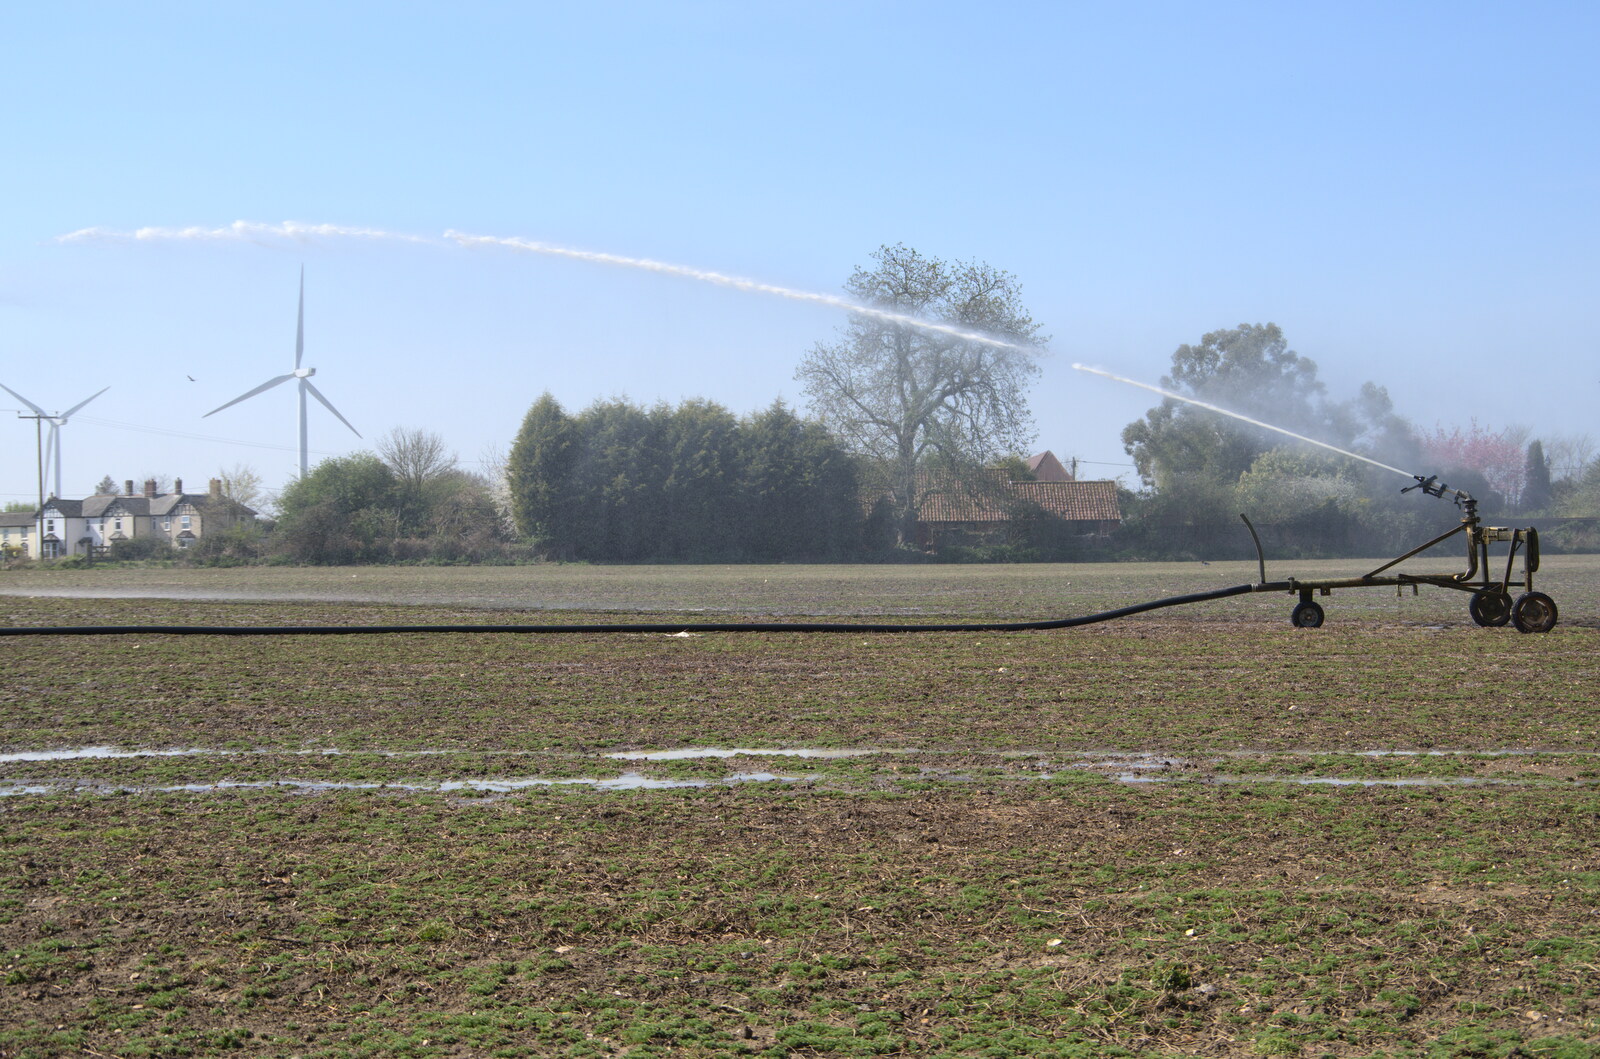 The side field gets some irrigation from A Weekend Camping Trip in the Garden, Brome, Suffolk - 11th April 2020